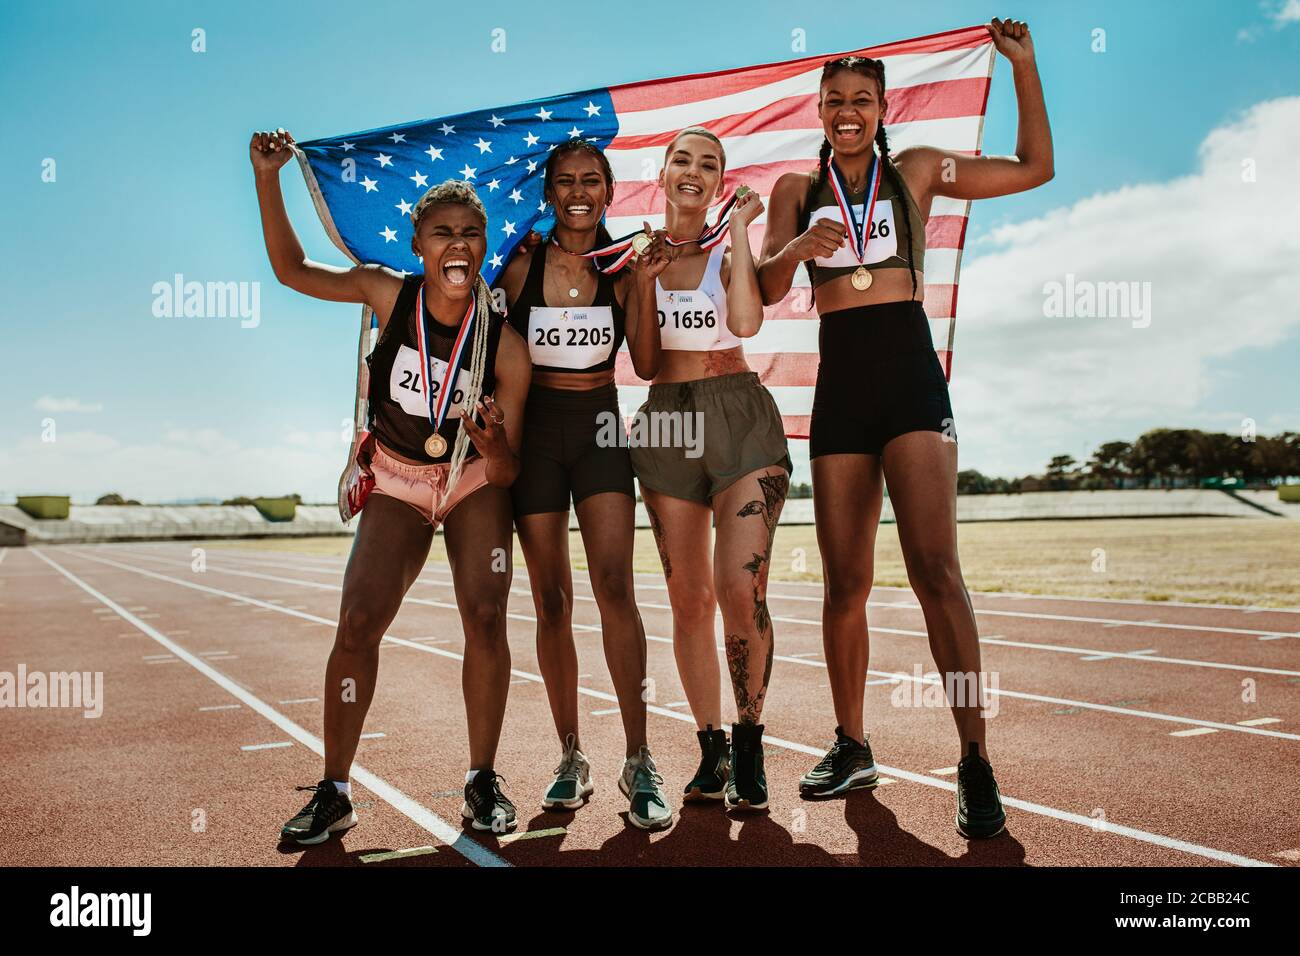 Happy multiracial athletes celebrating victory while standing together on racetrack. Group of runner with medals and American national flag winning a Stock Photo